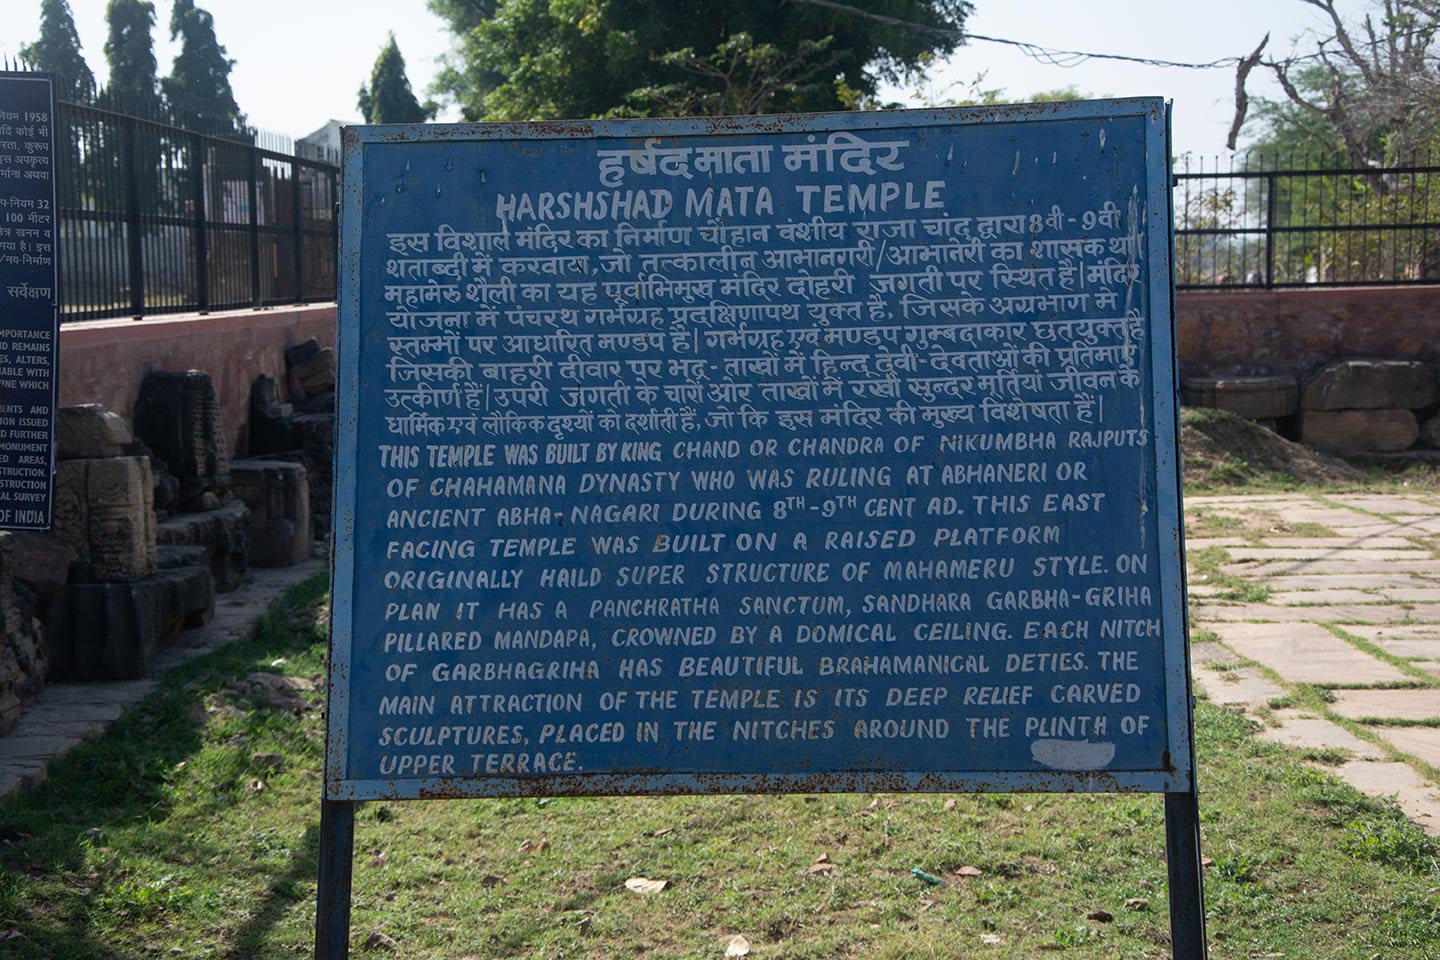 Information board in the temple premises installed by the Archaeological Survey of India (ASI) written in Hindi and English. The board provides information about the Harshat Mata Temple site and gives a basic introduction to the style of temple construction.